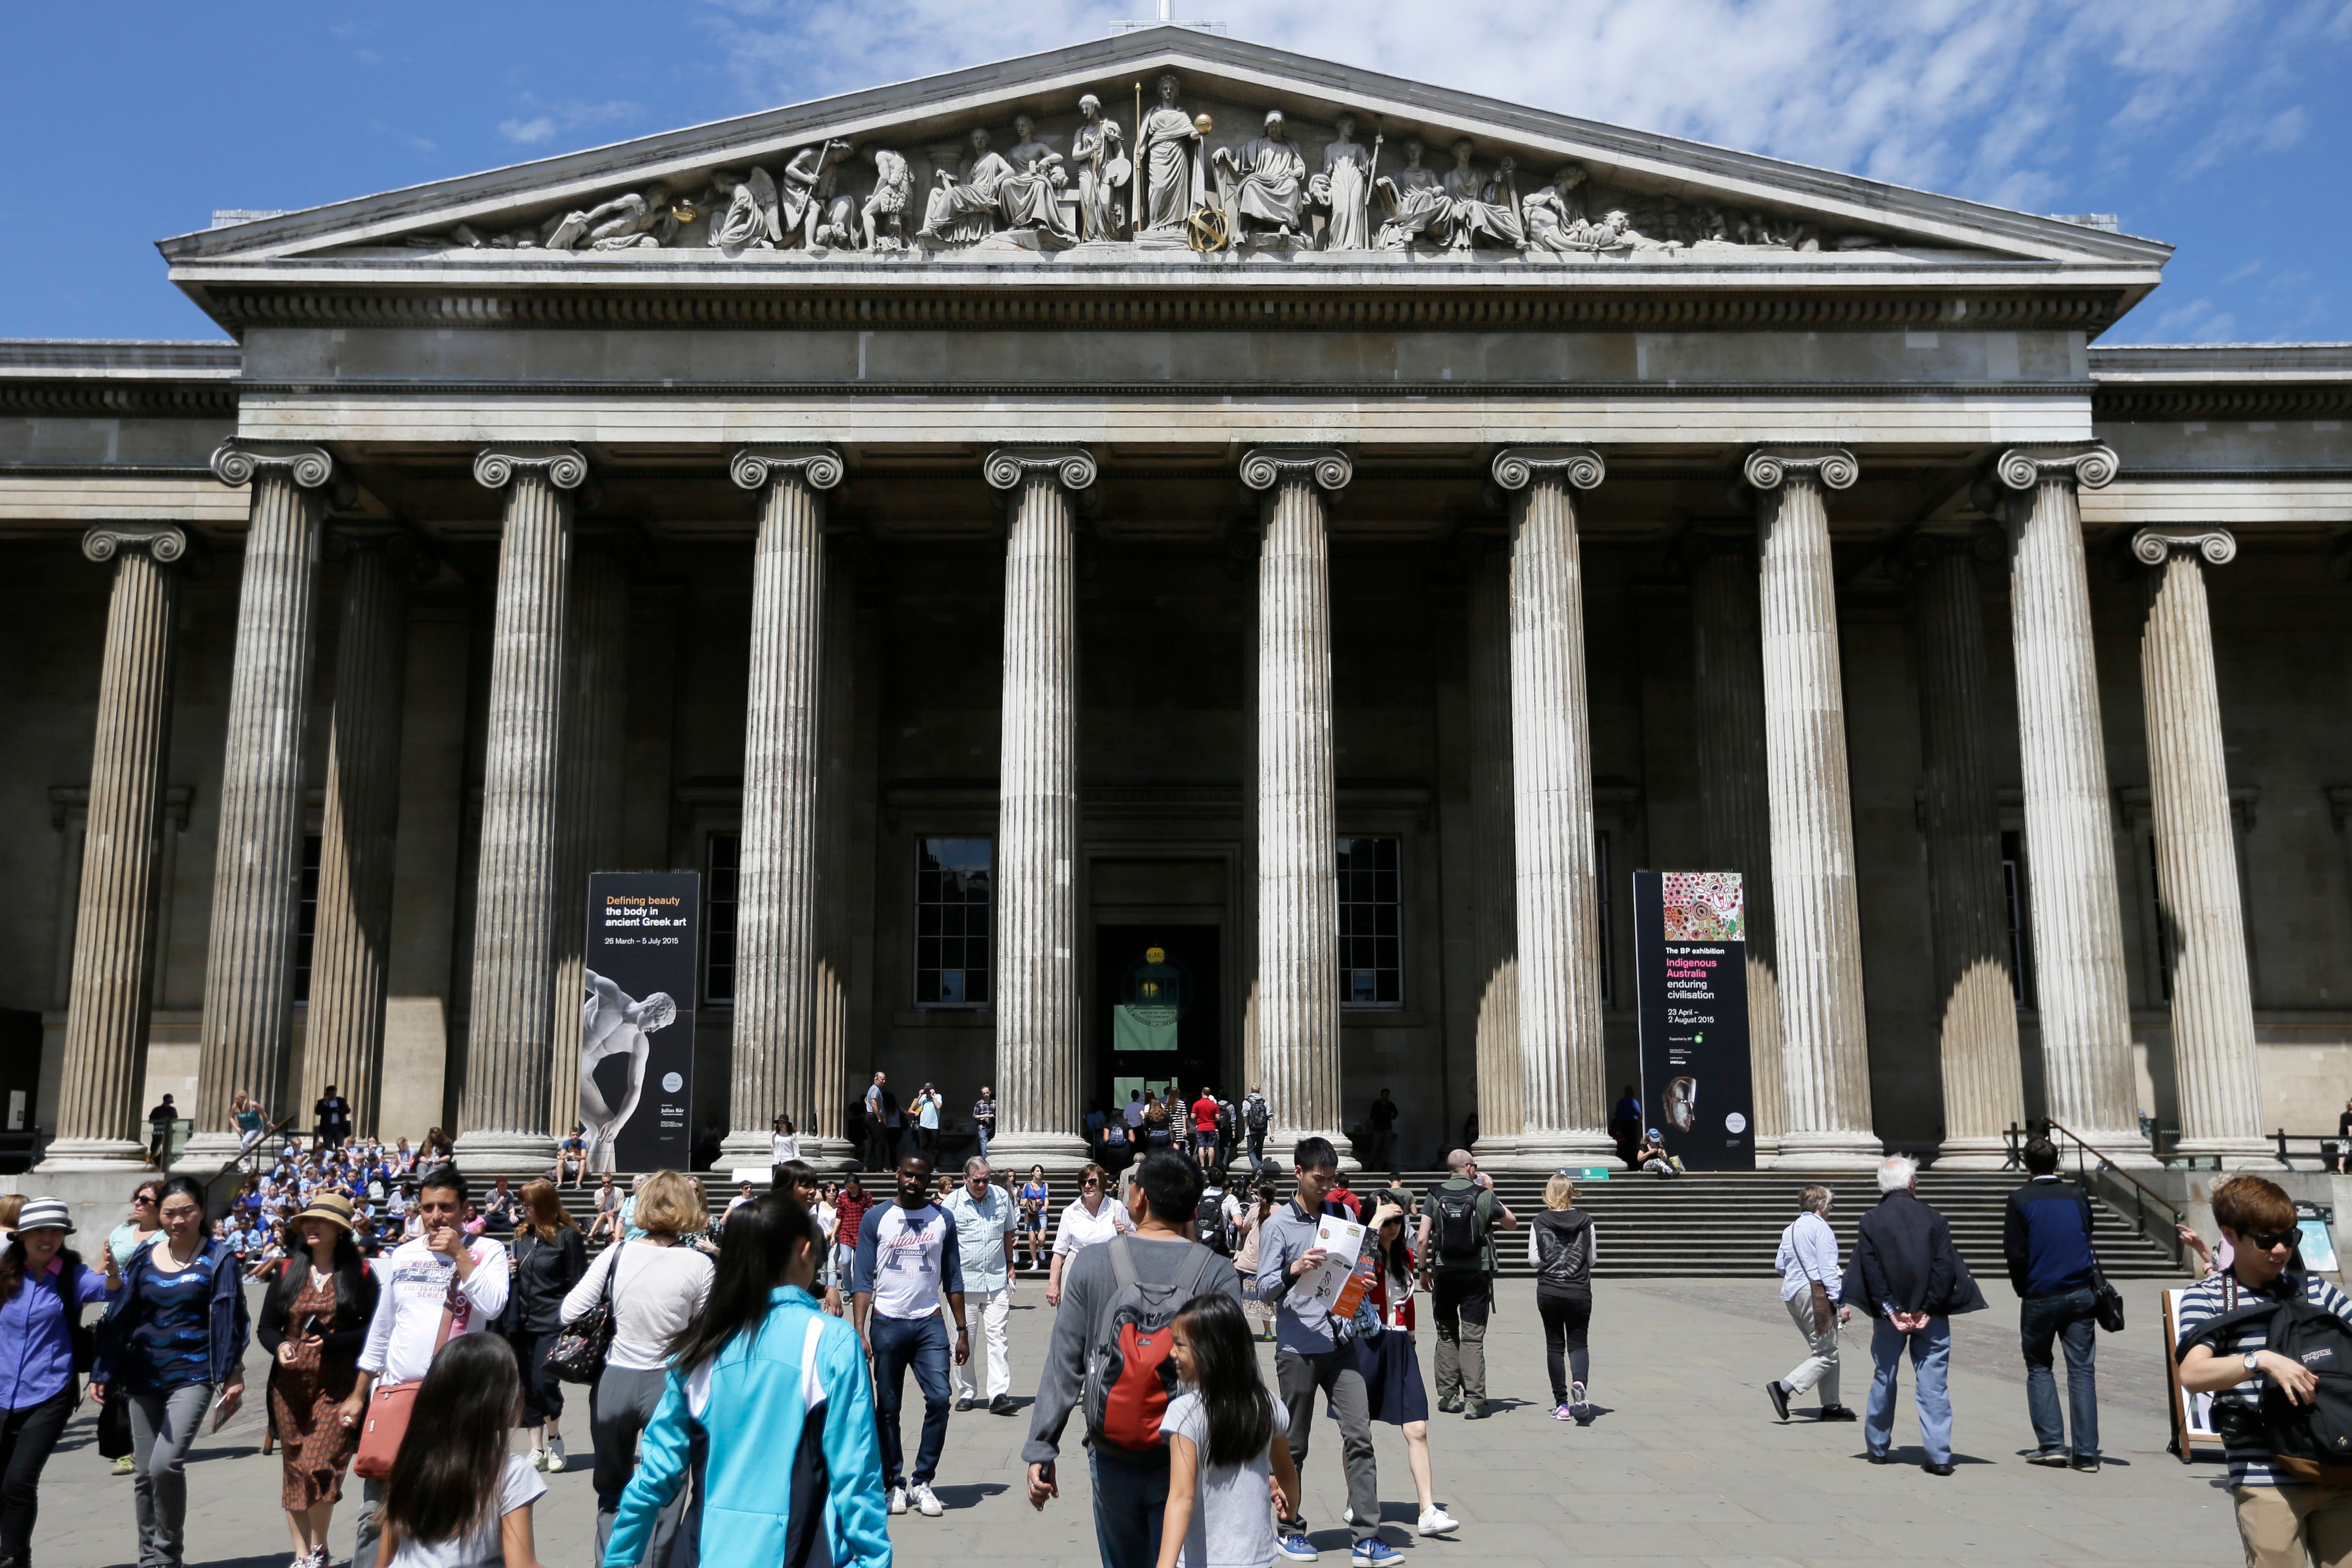 The revelations come as the British Museum has appointed a new director after the London-based institution was thrown into crisis over an alleged thefts scandal